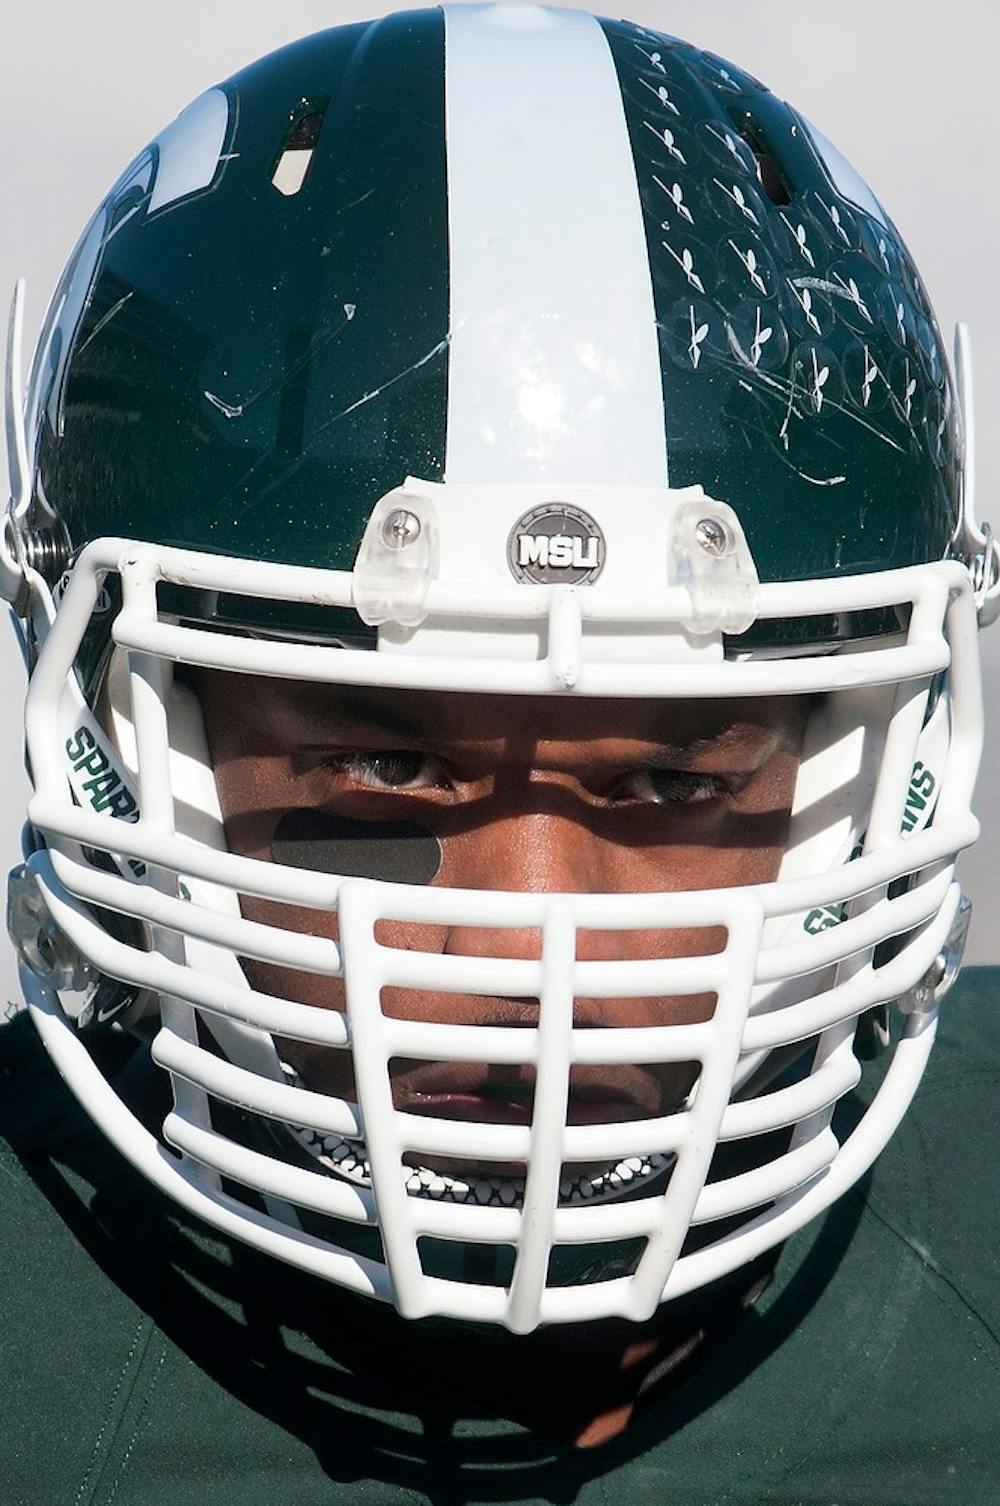 	<p>Sophomore defensive end Shilique Calhoun looks at the field on Nov. 30, 2013, before the game against Minnesota at Spartan Stadium. The Spartans defeated the Golden Gophers, 14-3. Julia Nagy/The State News</p>